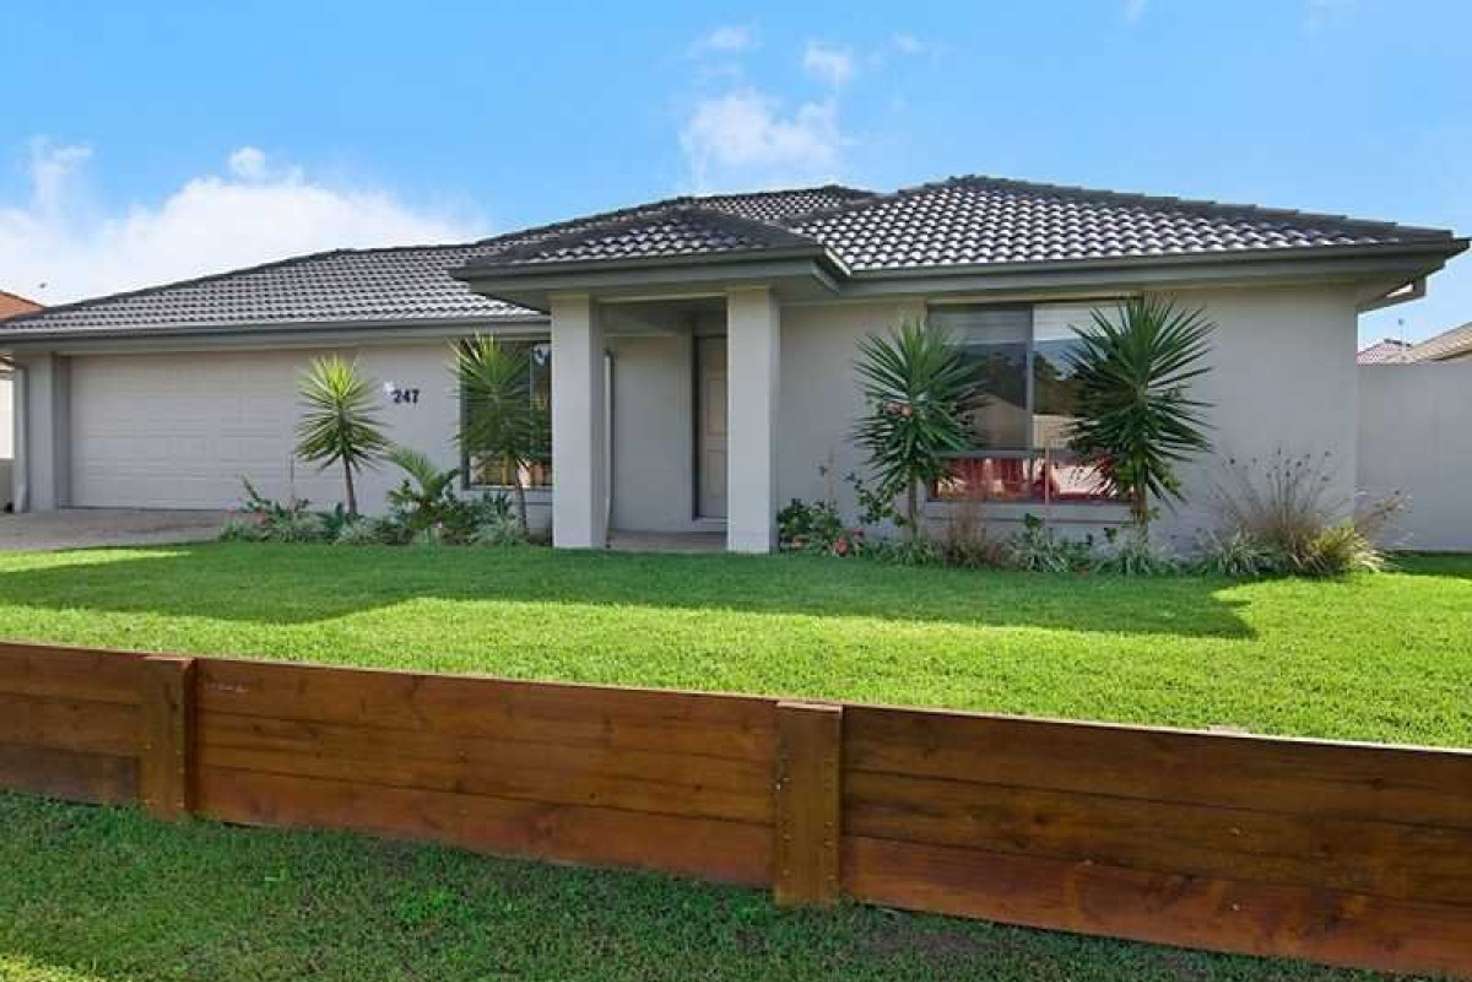 Main view of Homely house listing, 247 University Way, Sippy Downs QLD 4556